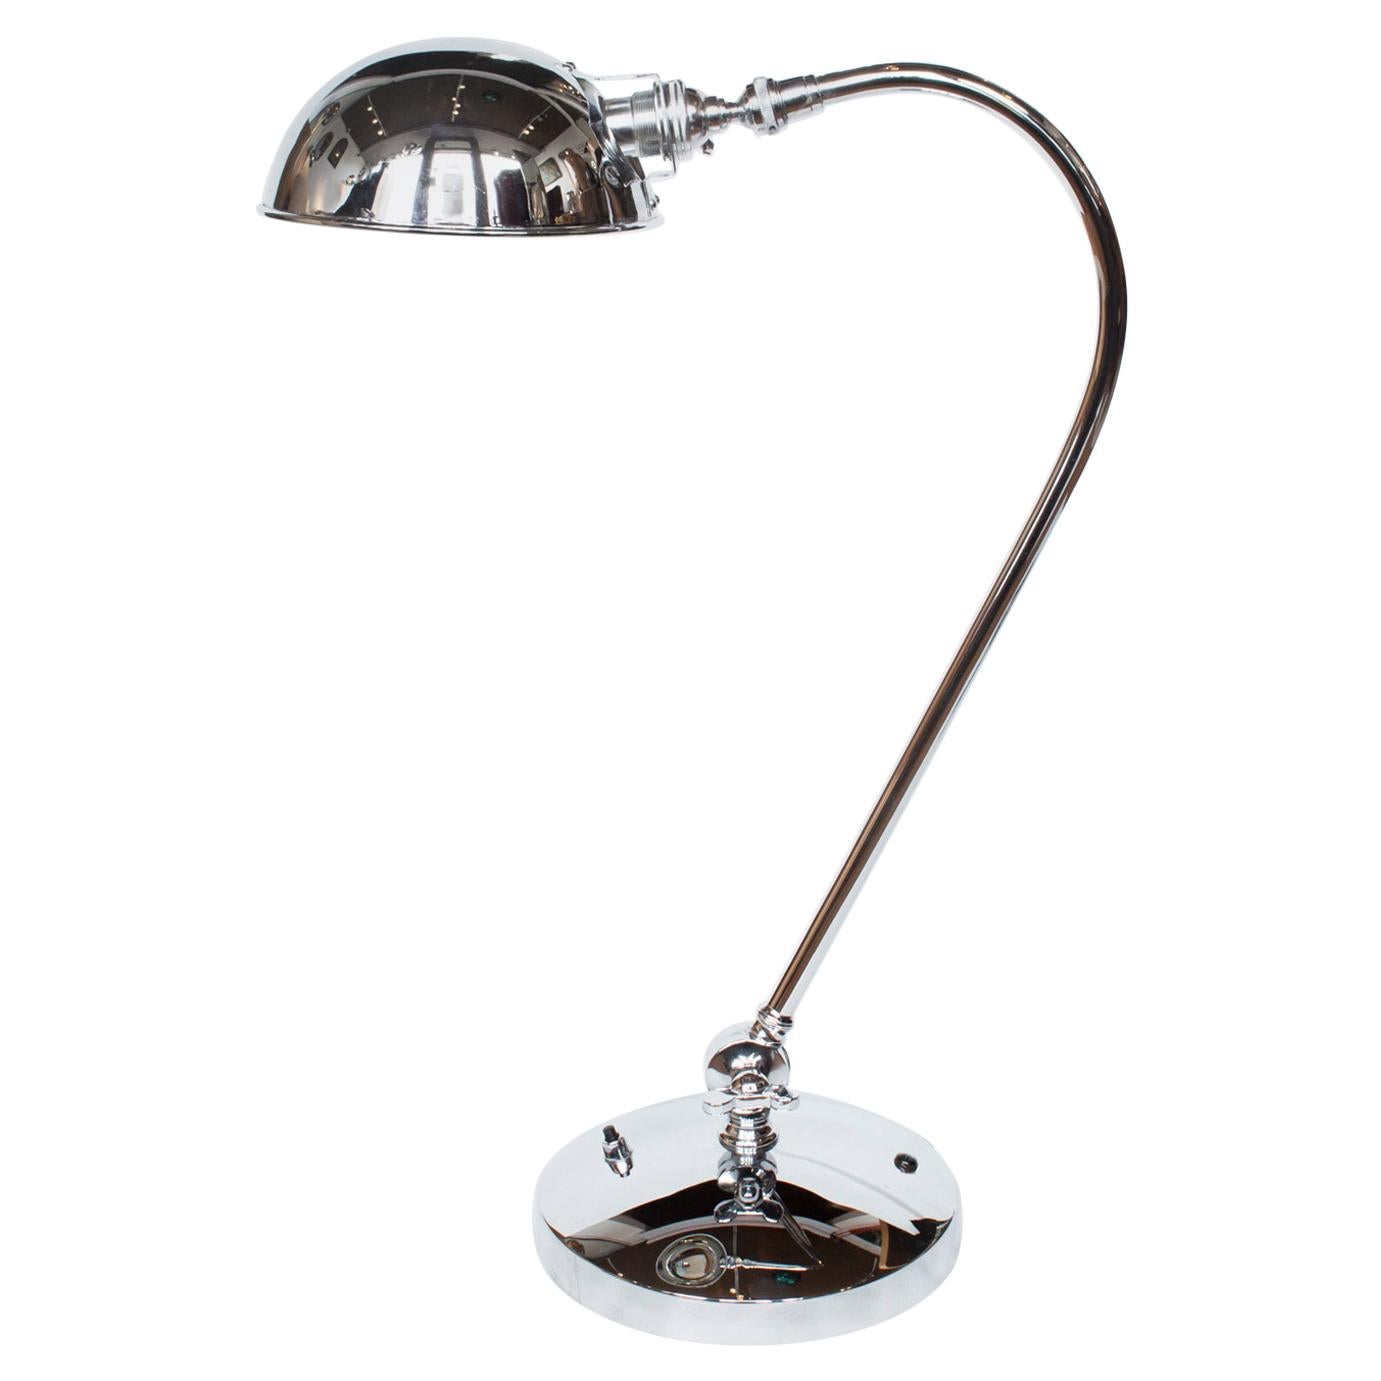 Art Deco, Adjustable, Chrome Desk Lamp with Some Replacement Parts